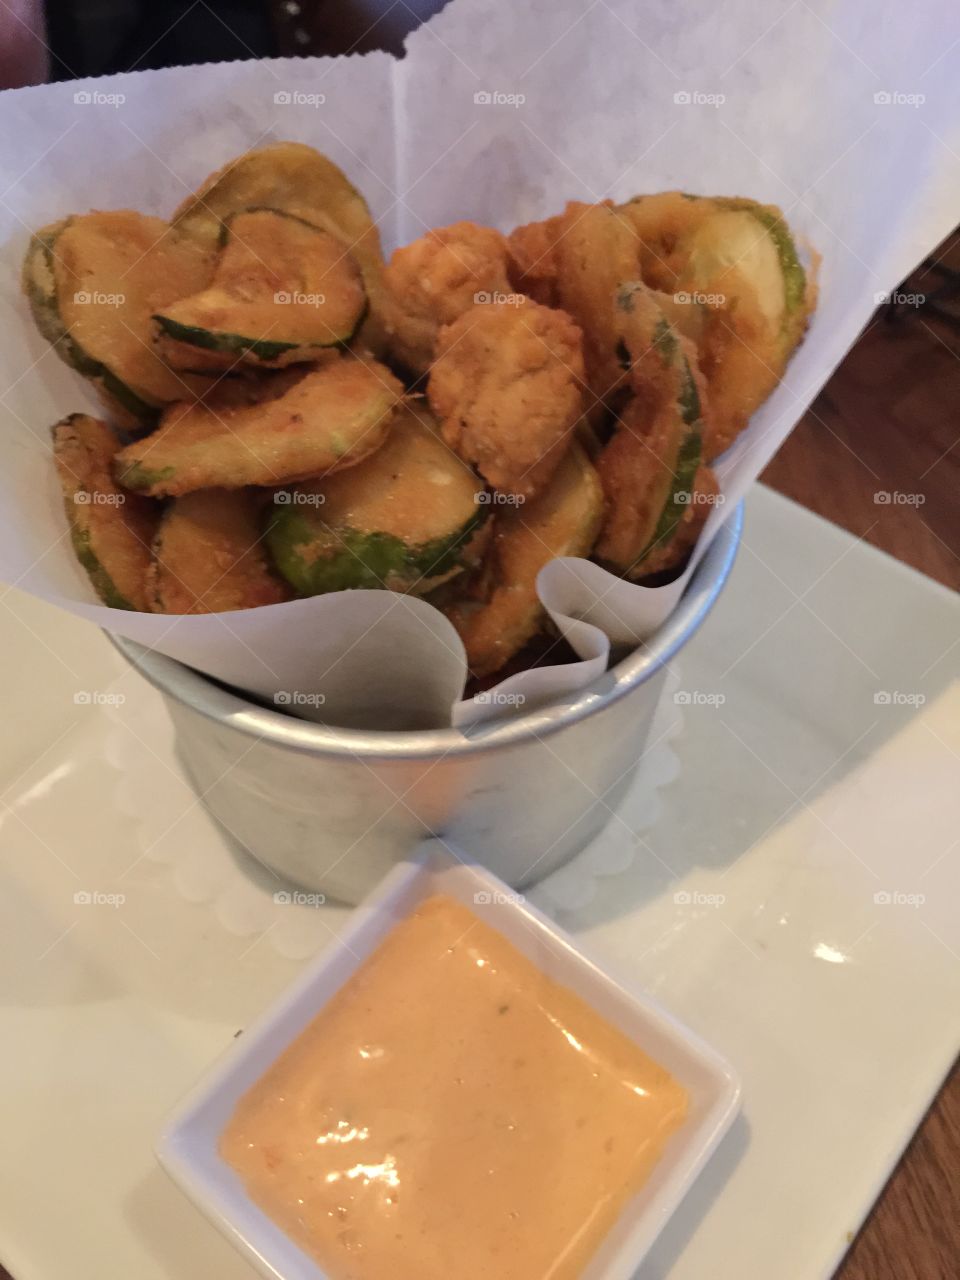 Sweet & Sour Fried Pickles. Tried a new appetizer at Max's Burger in East Longmeadow, Massachusetts and they were delicious!